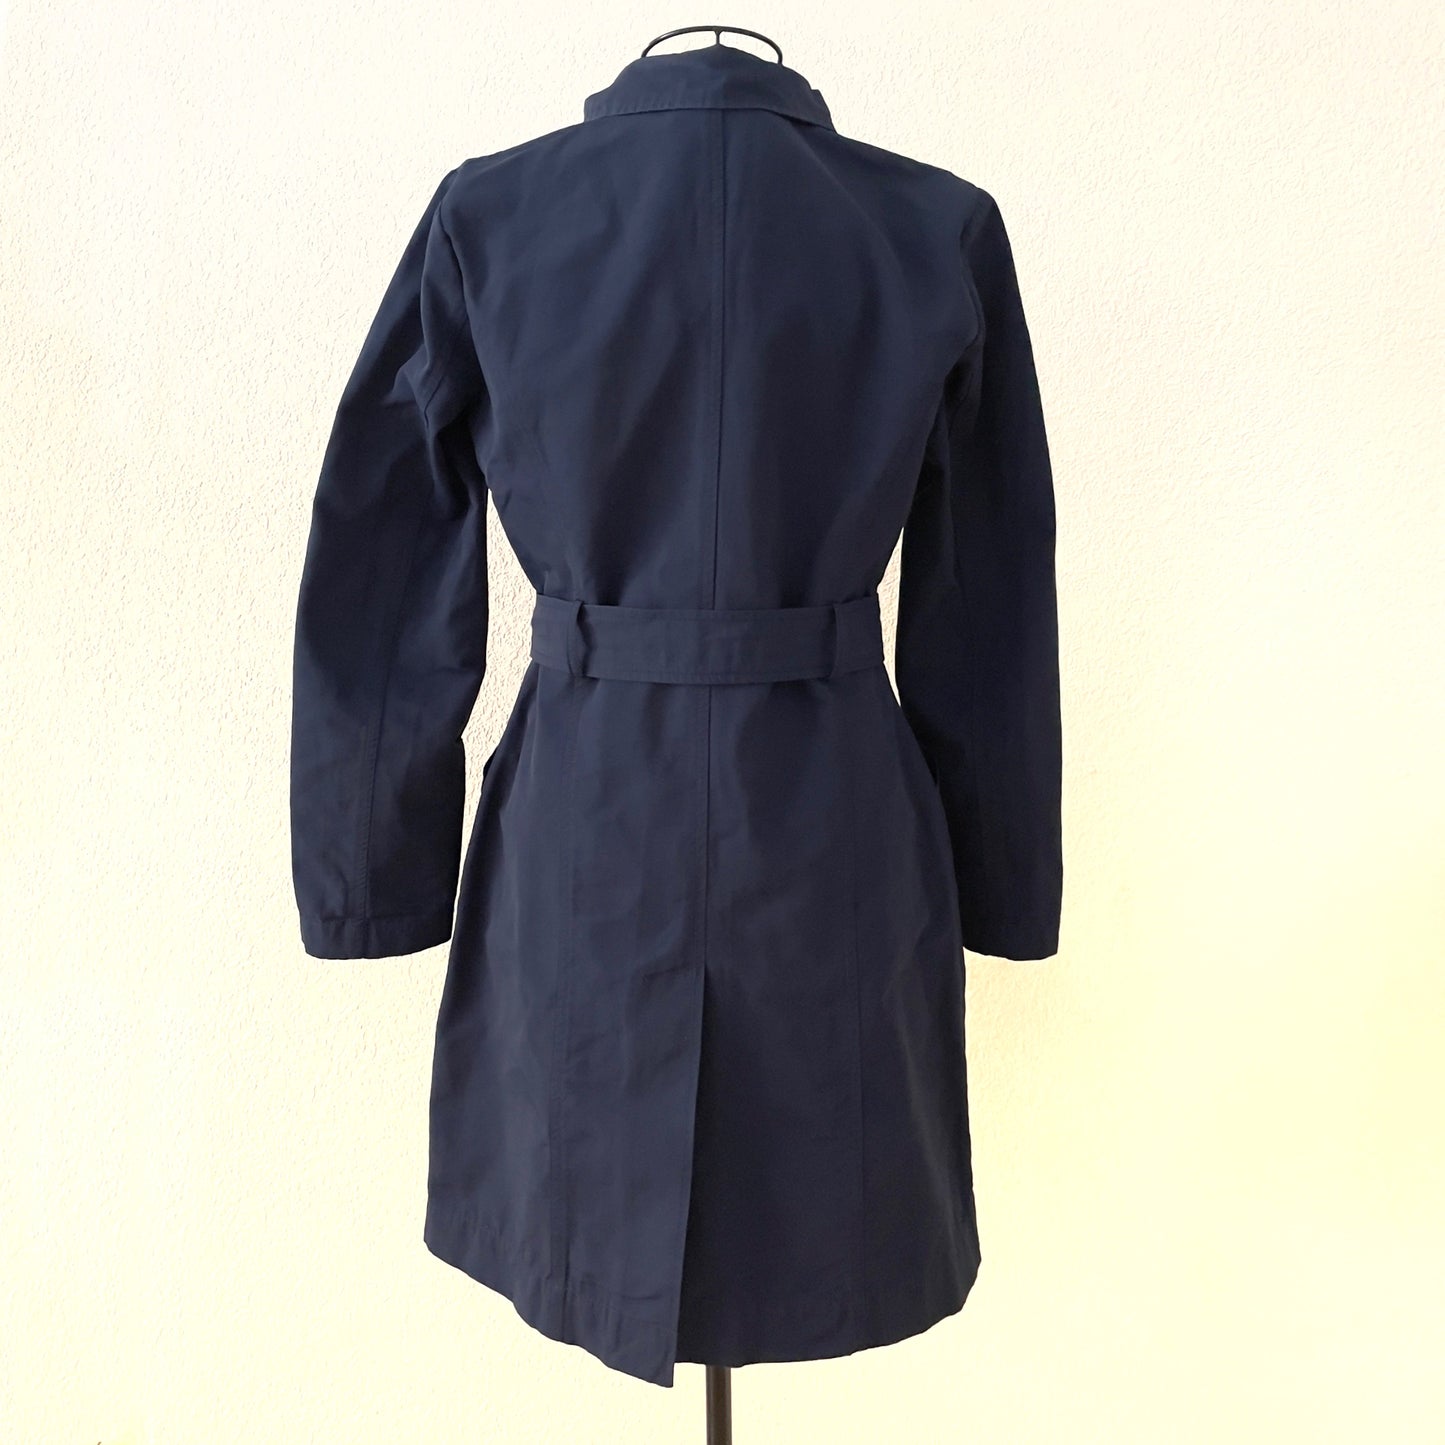 Blue Trench Coat - Max&Co.